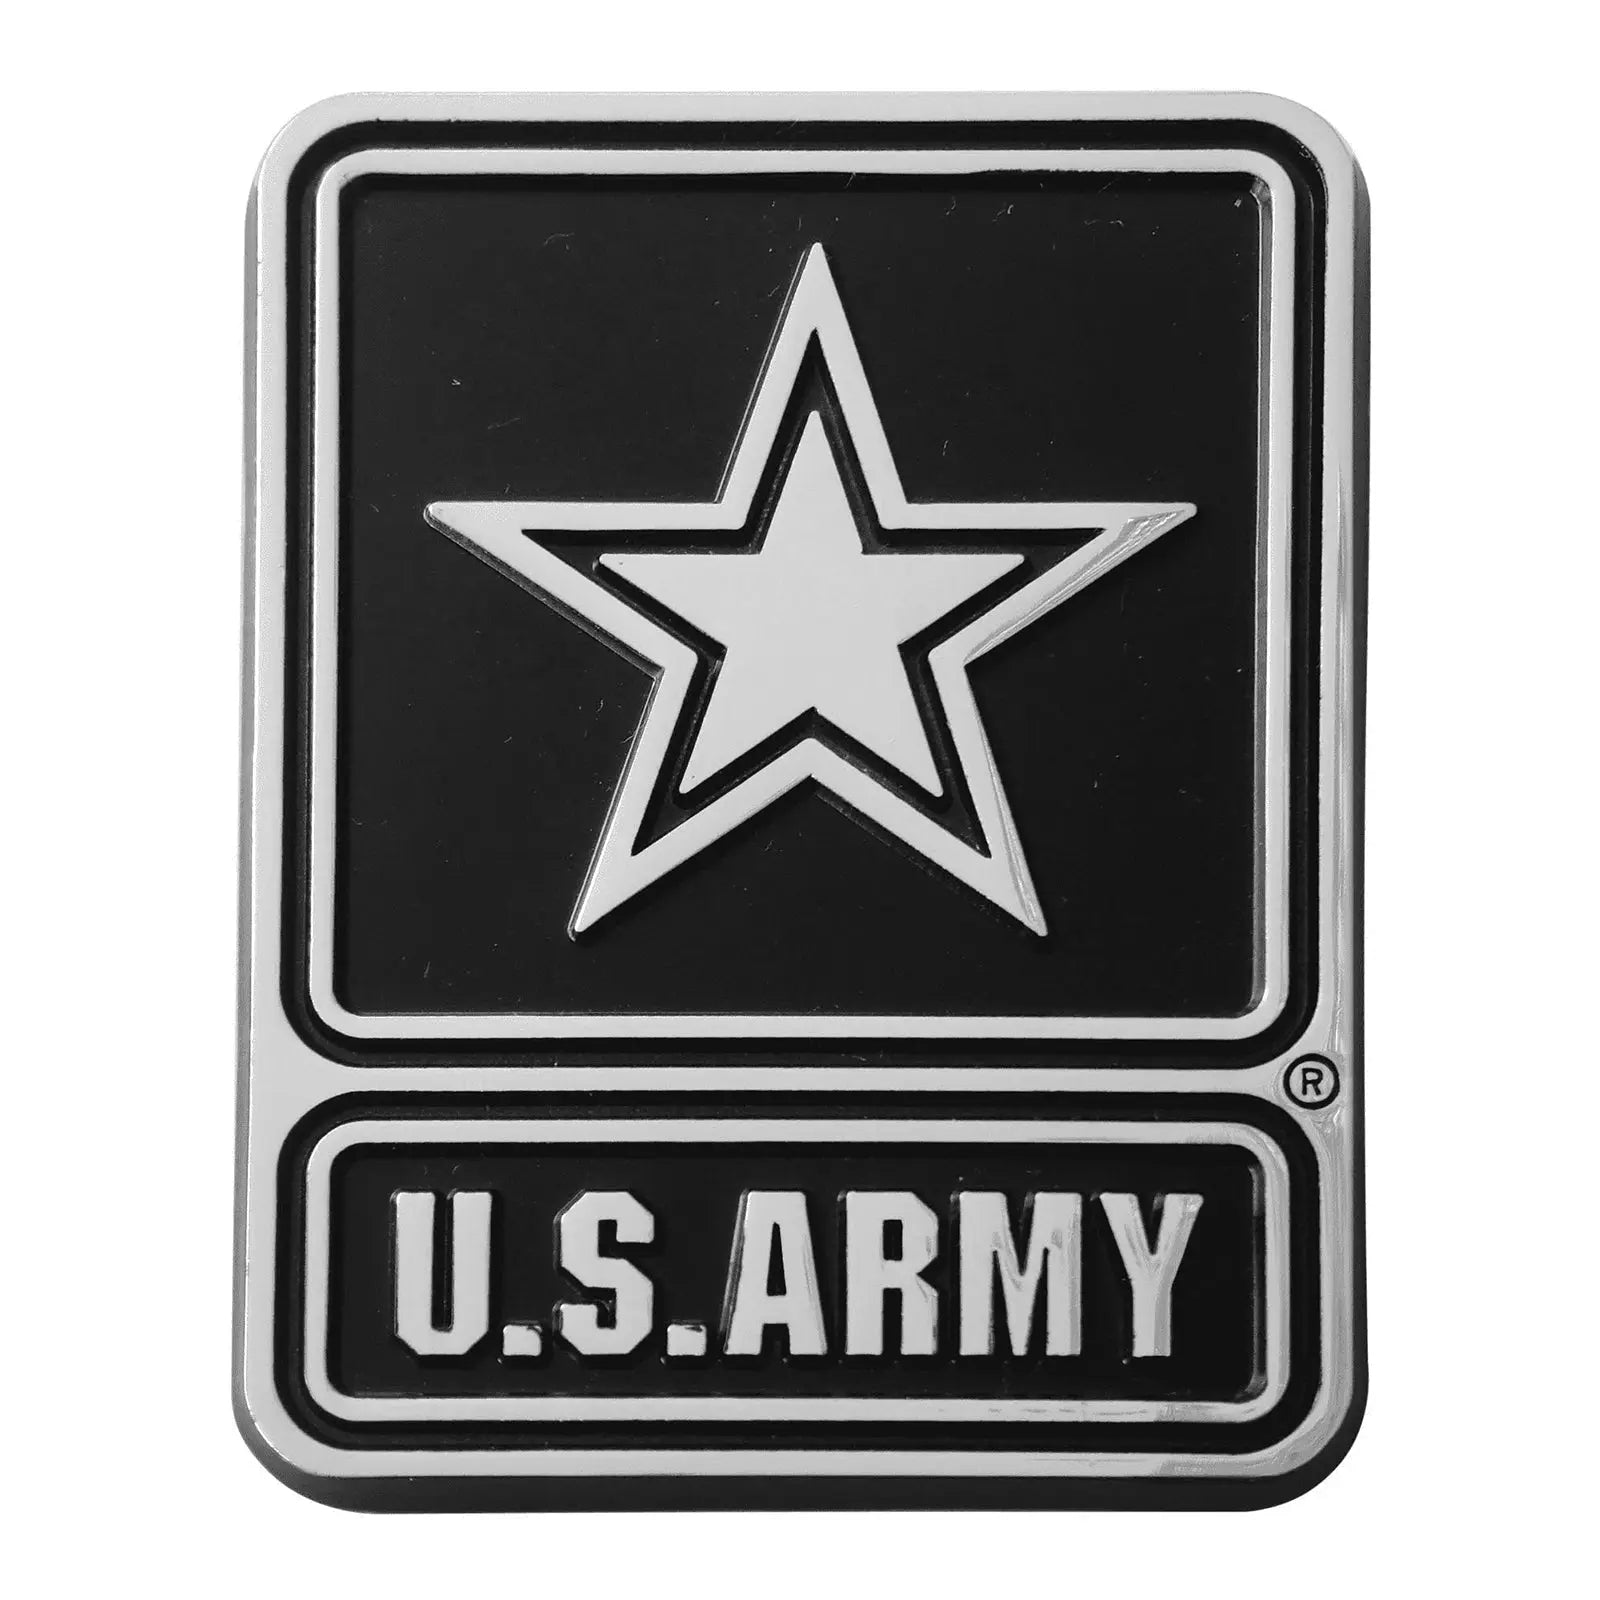 U.S Army Solid Metal Chrome Plated Car Auto Emblem – Patch Collection